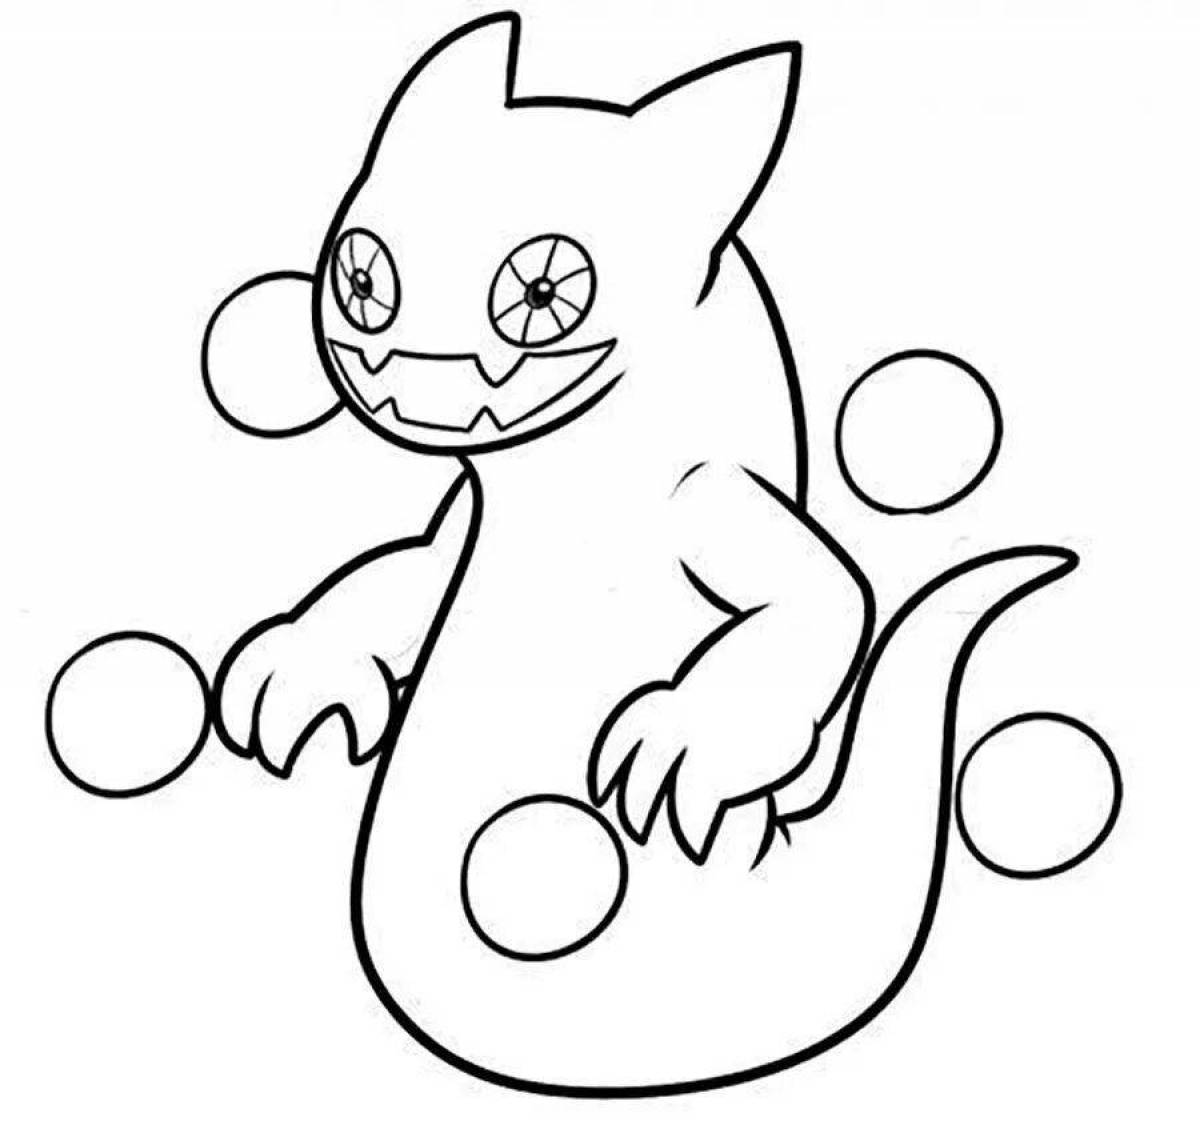 Live singing monsters coloring pages for kids